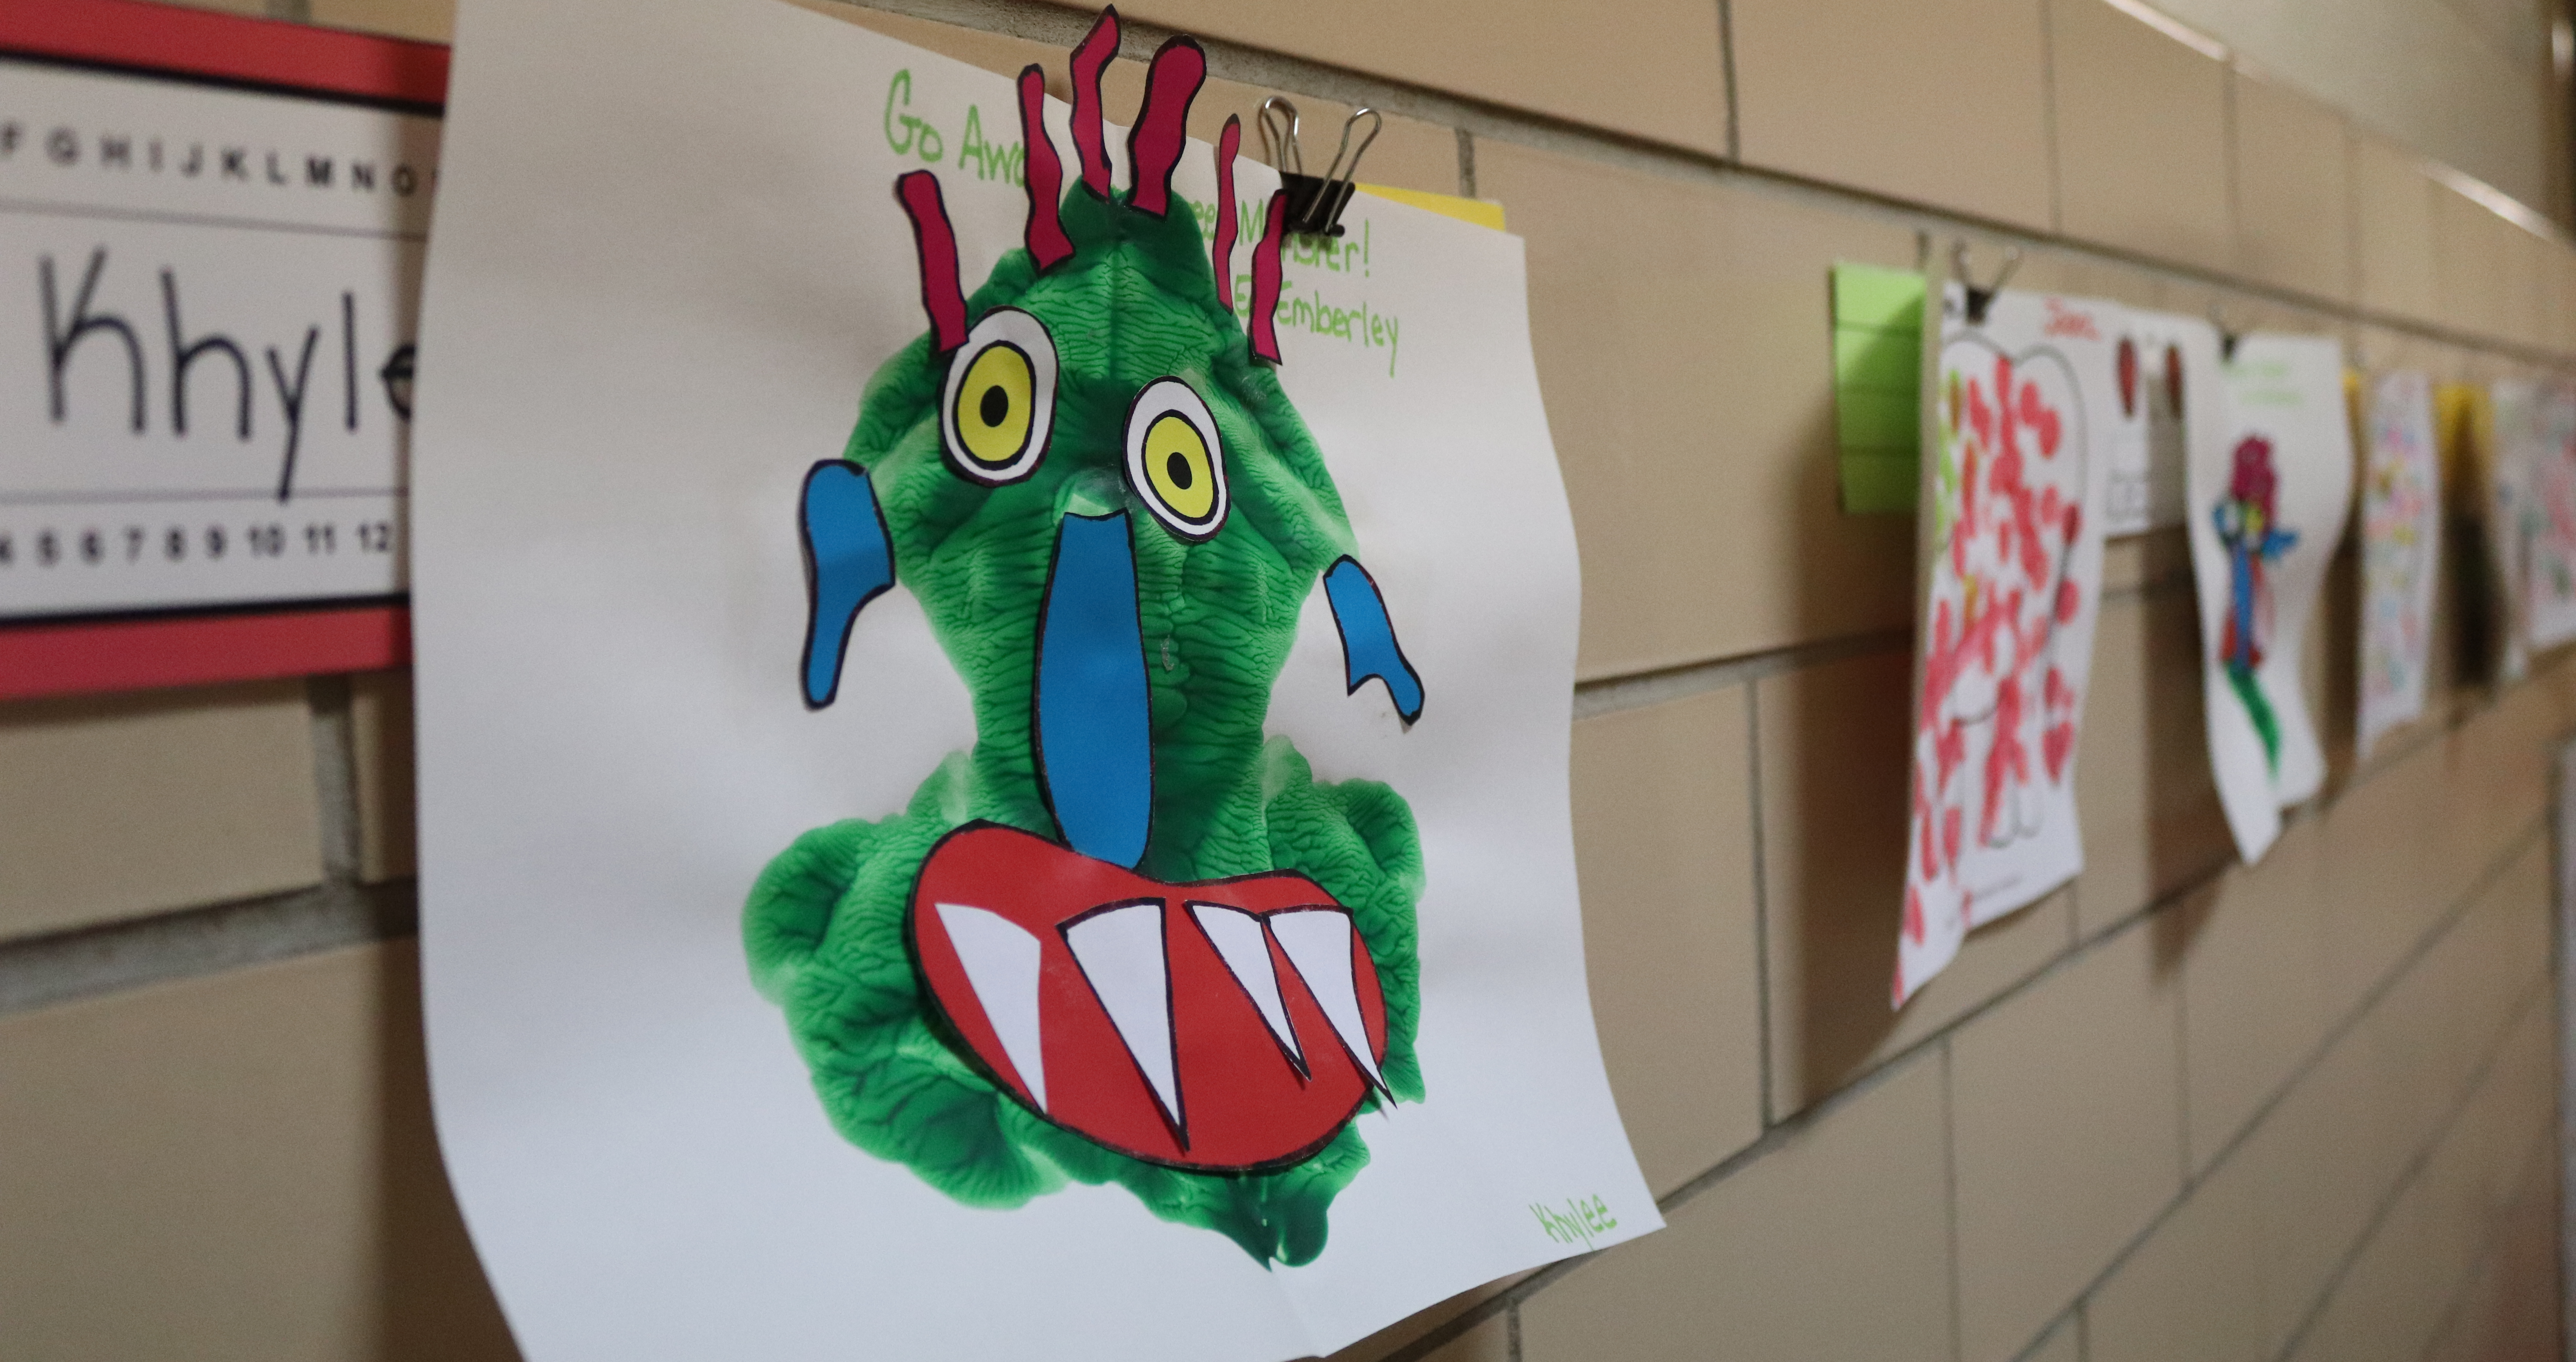 Student painting of a monster